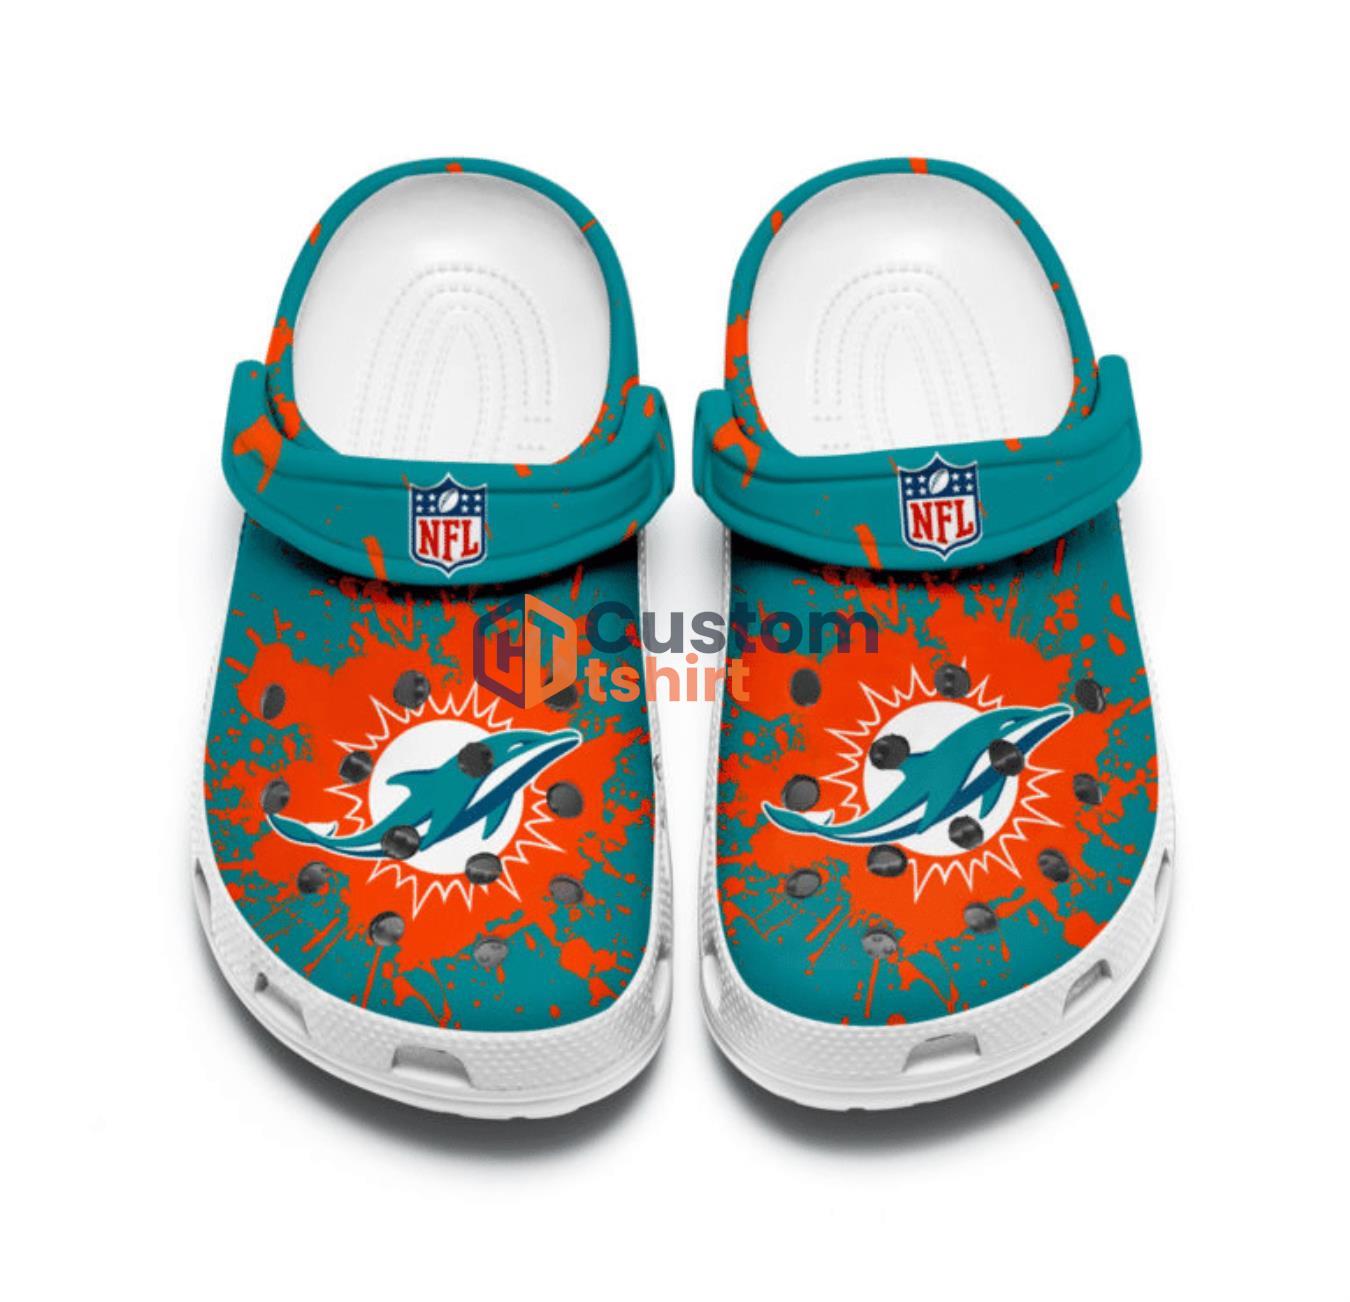 Miami Dolphins Clog Shoes Custom 171001Cr Clog Shoes band Comfortable For Mens And Womens Product Photo 1 Product photo 1